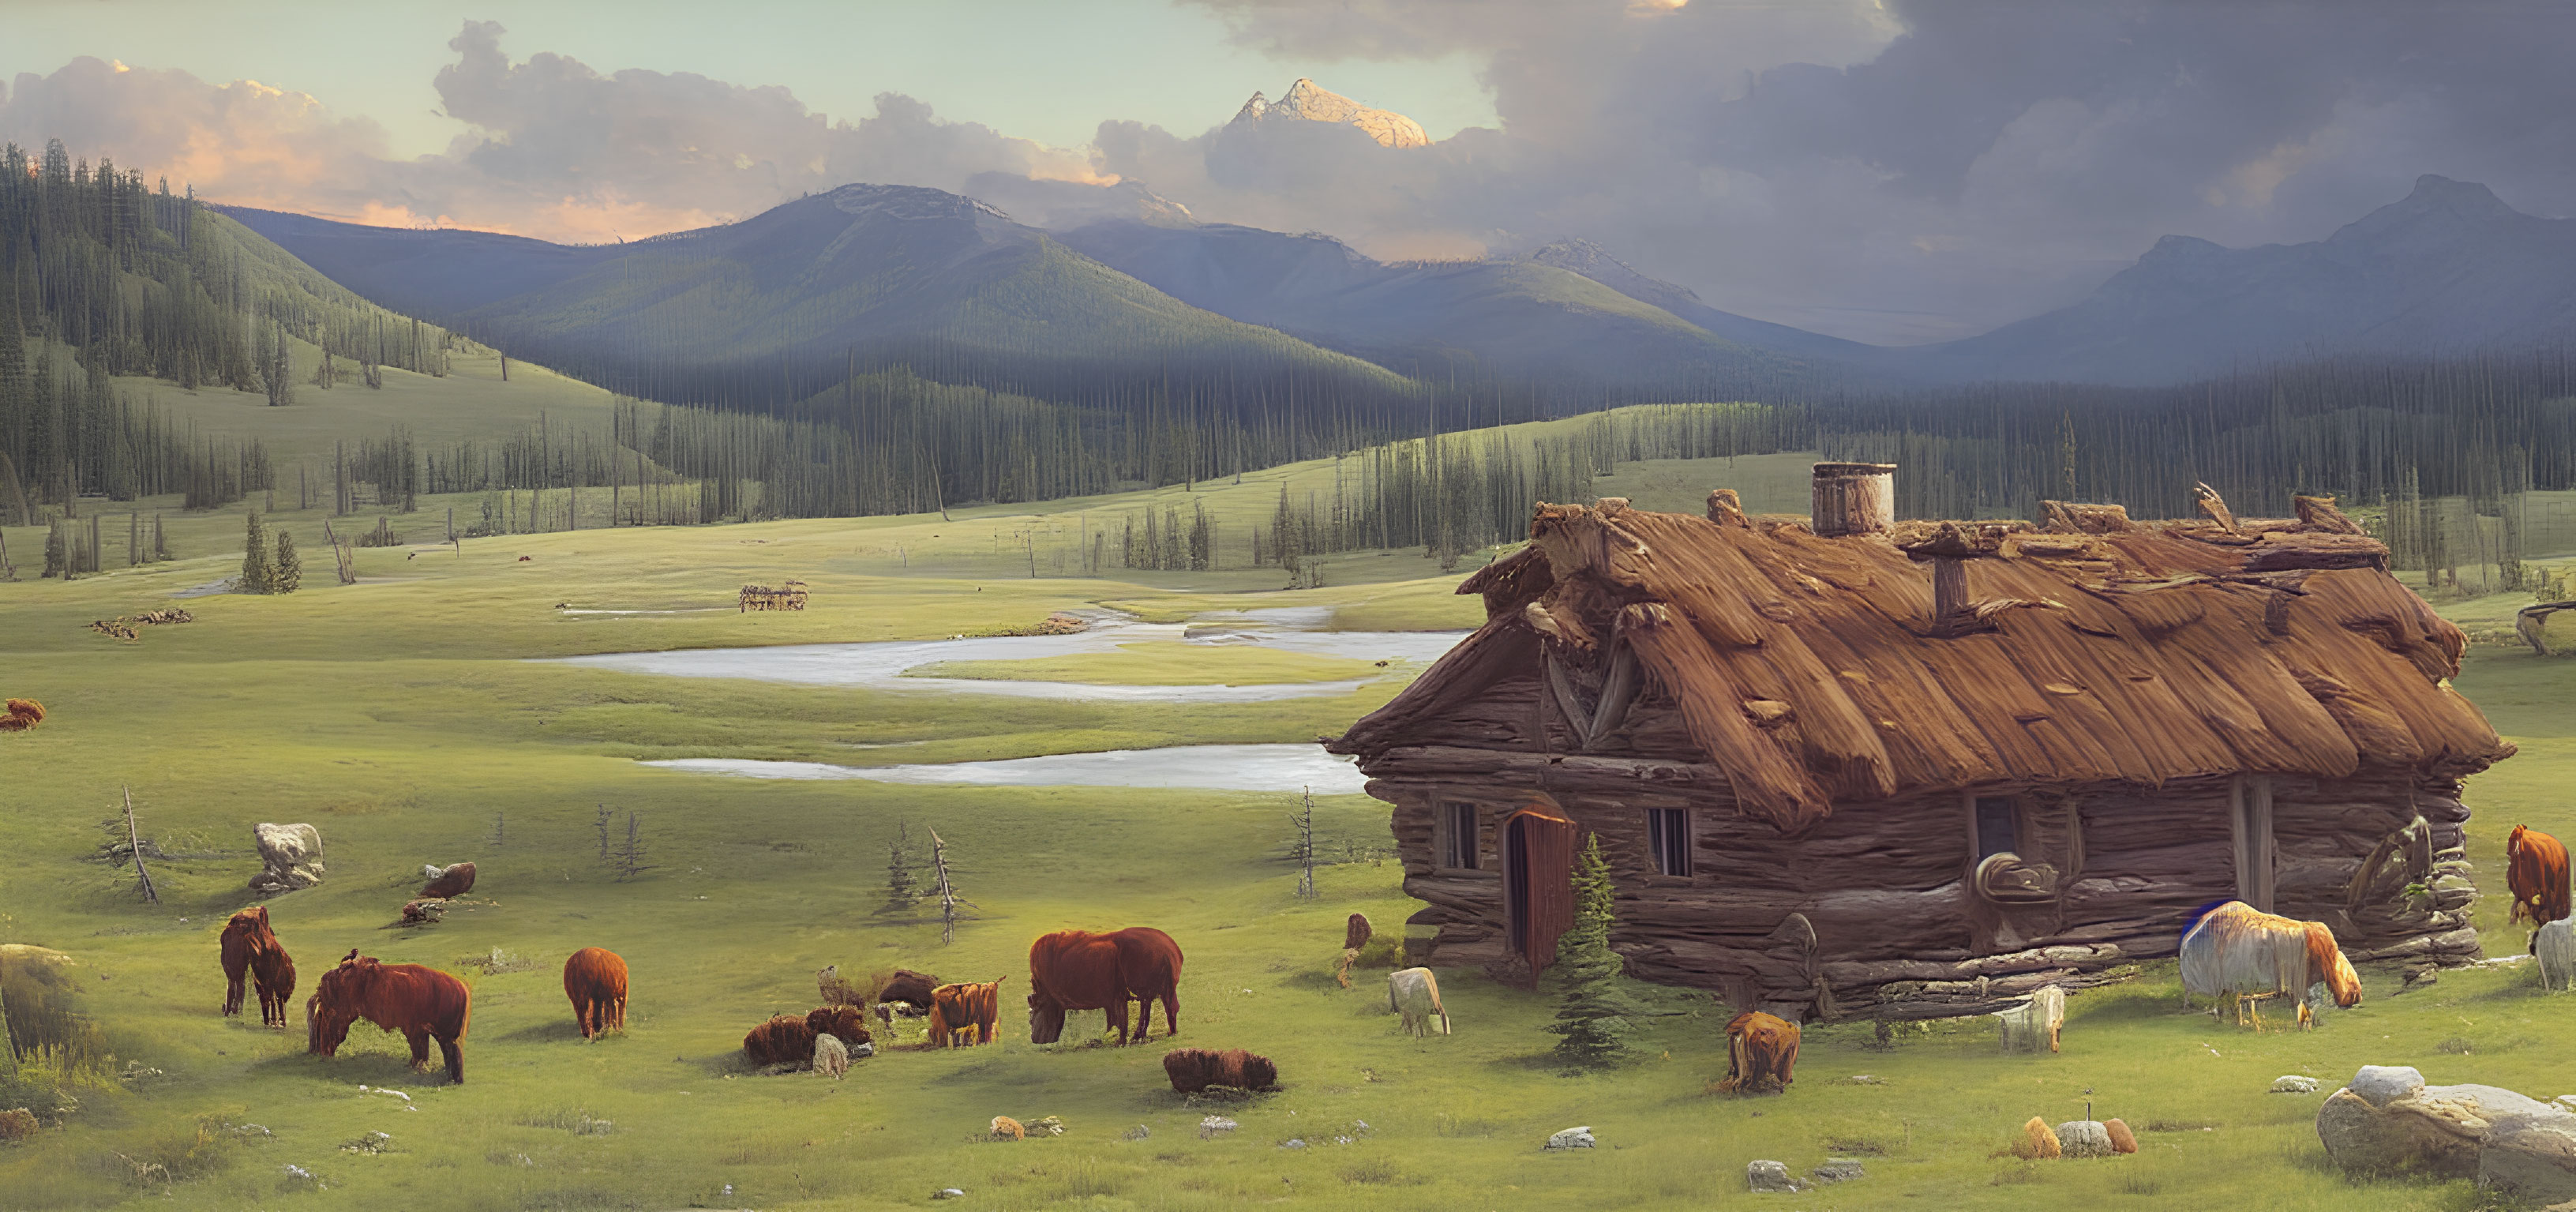 Rustic log cabin in serene landscape with grazing cattle, river, and mountains